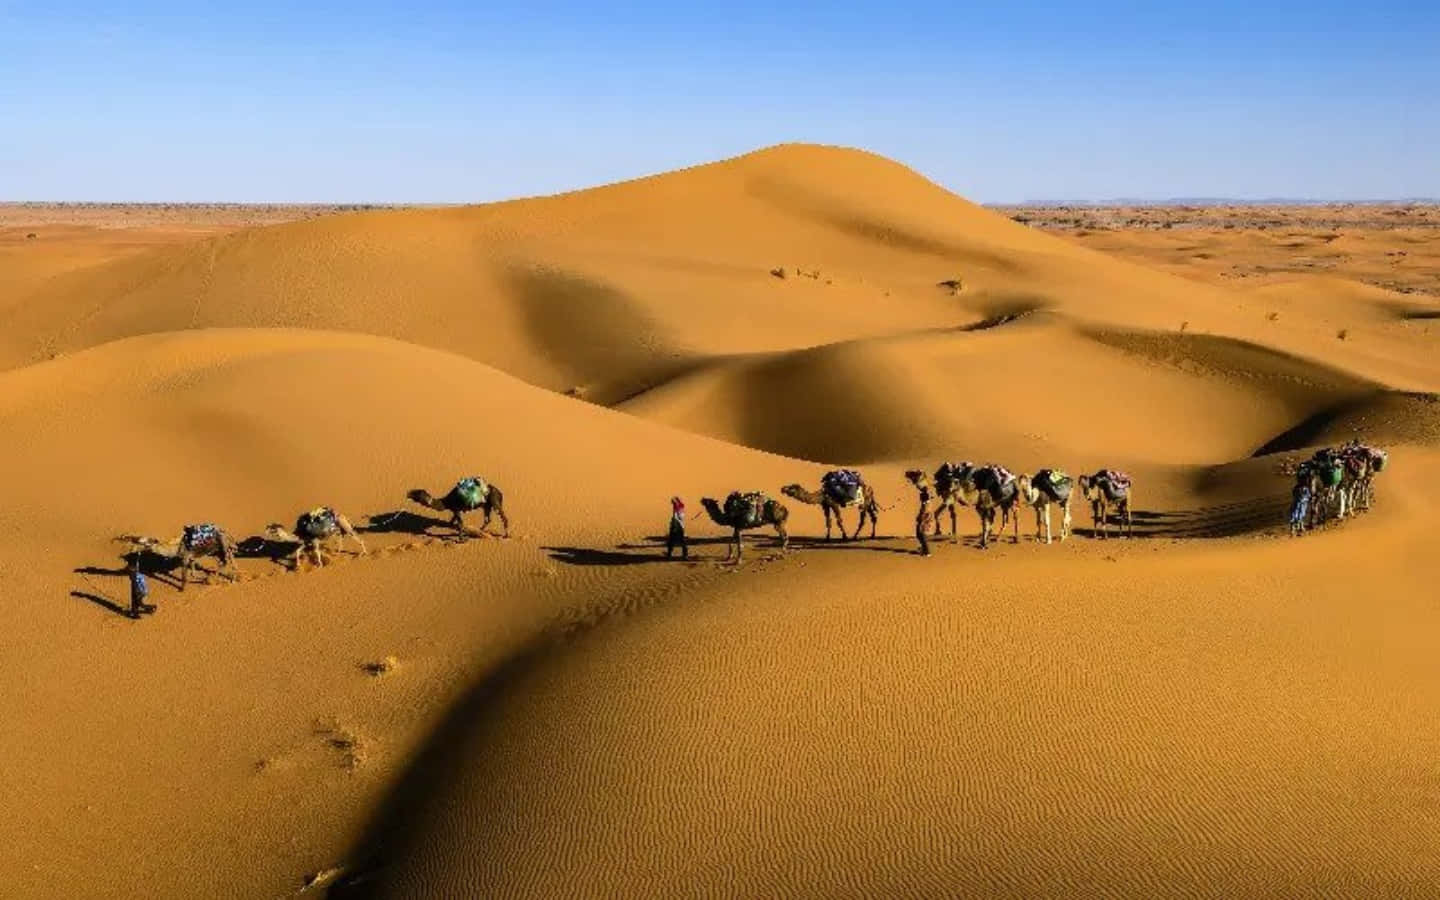 a group of people walking through the desert